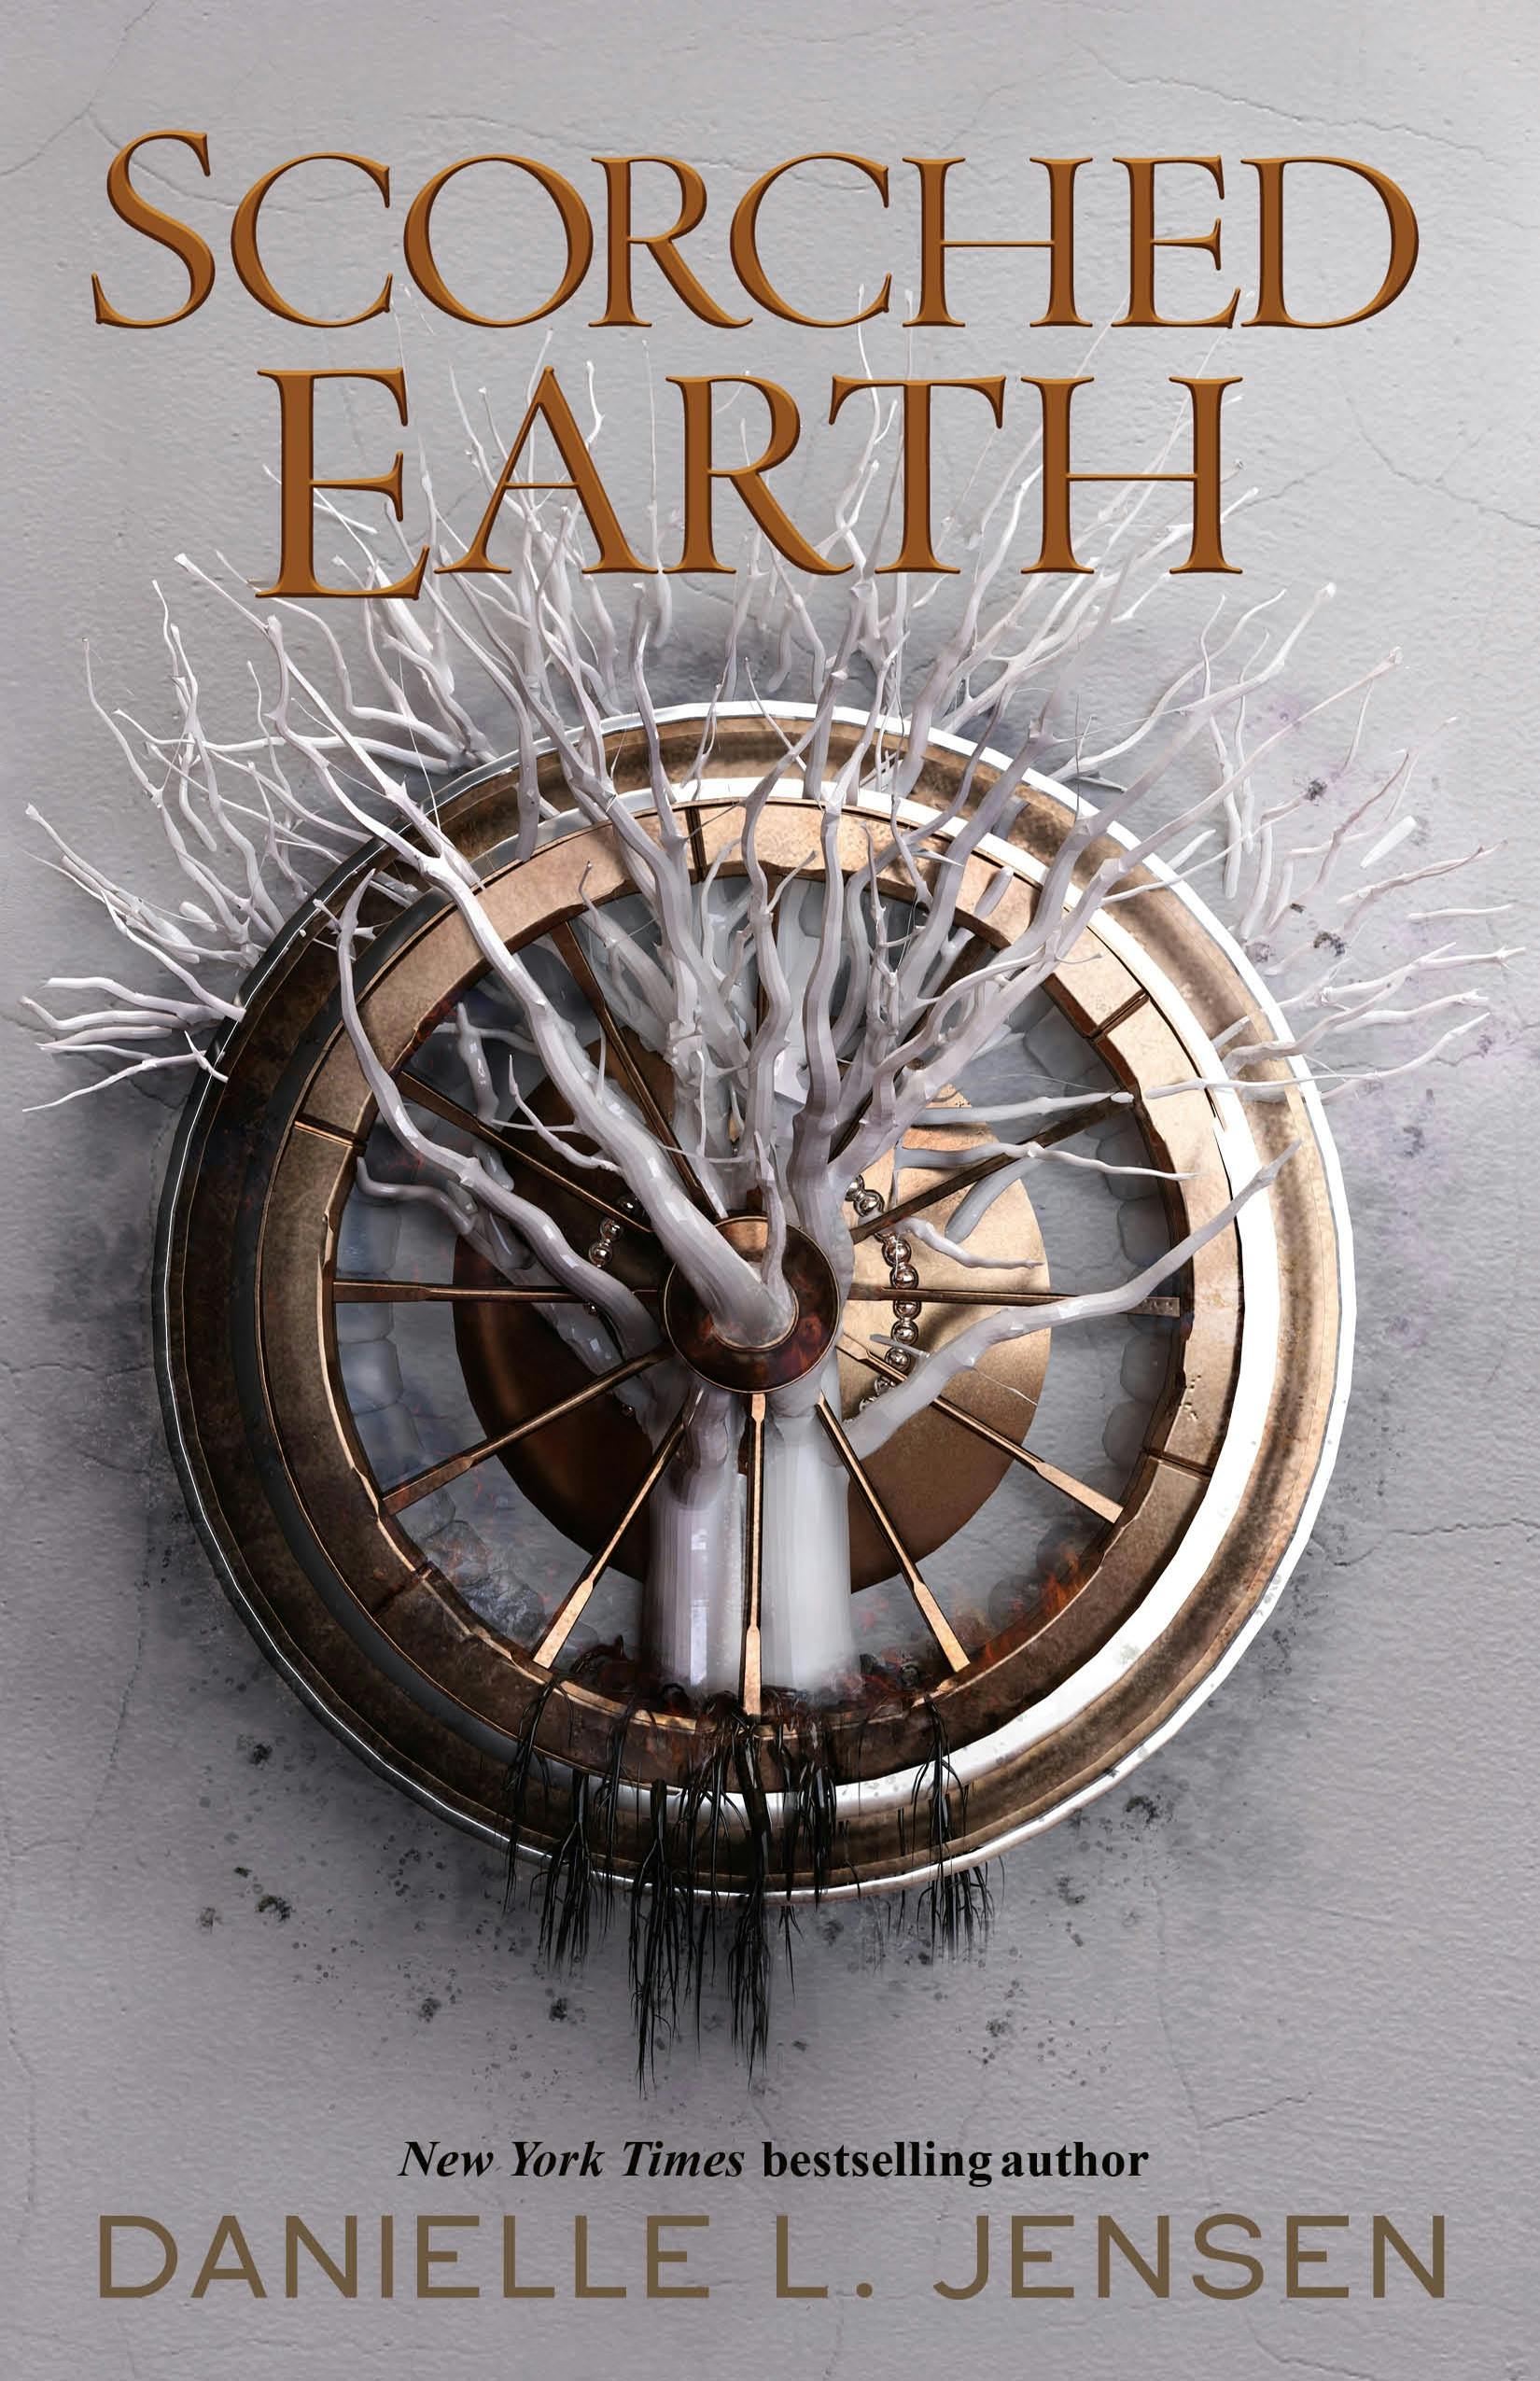 Cover for the book titled as: Scorched Earth